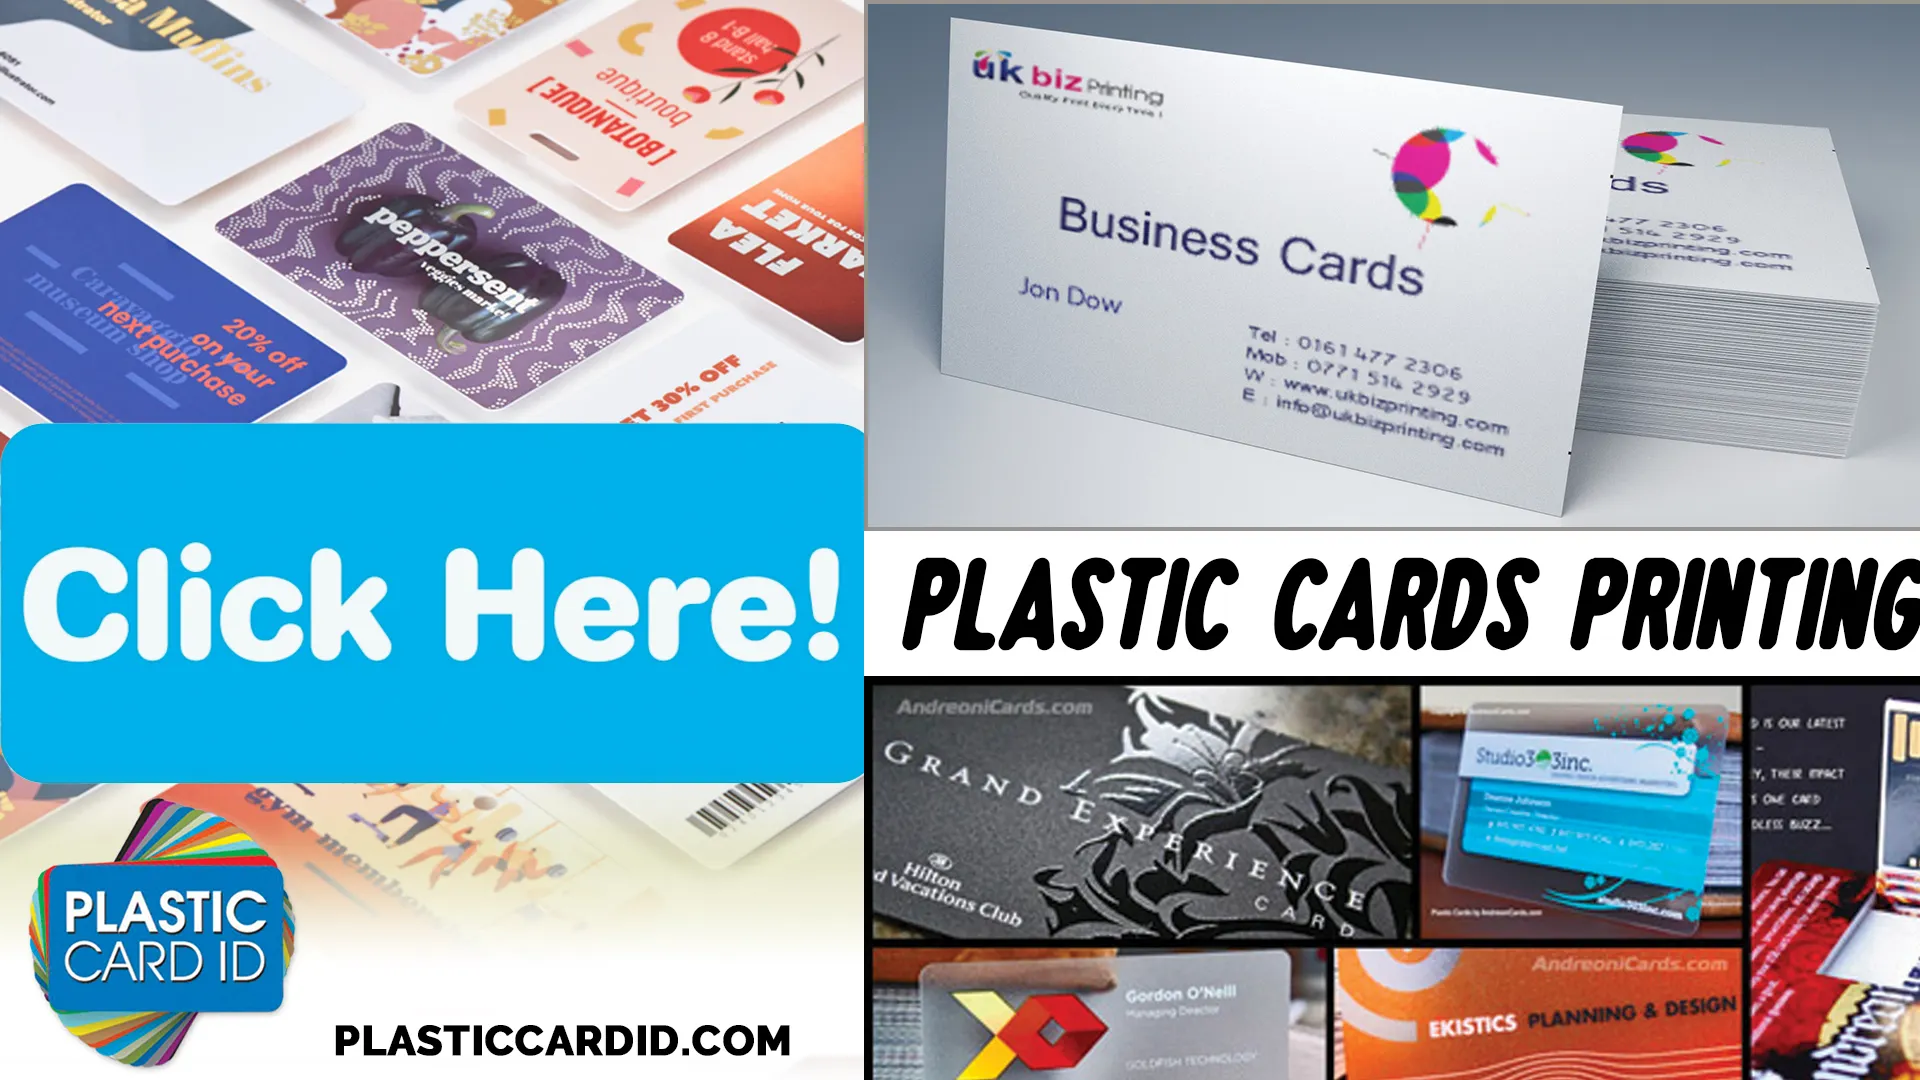 Welcome to the World of Enhanced Customer Loyalty with Plastic Card ID




